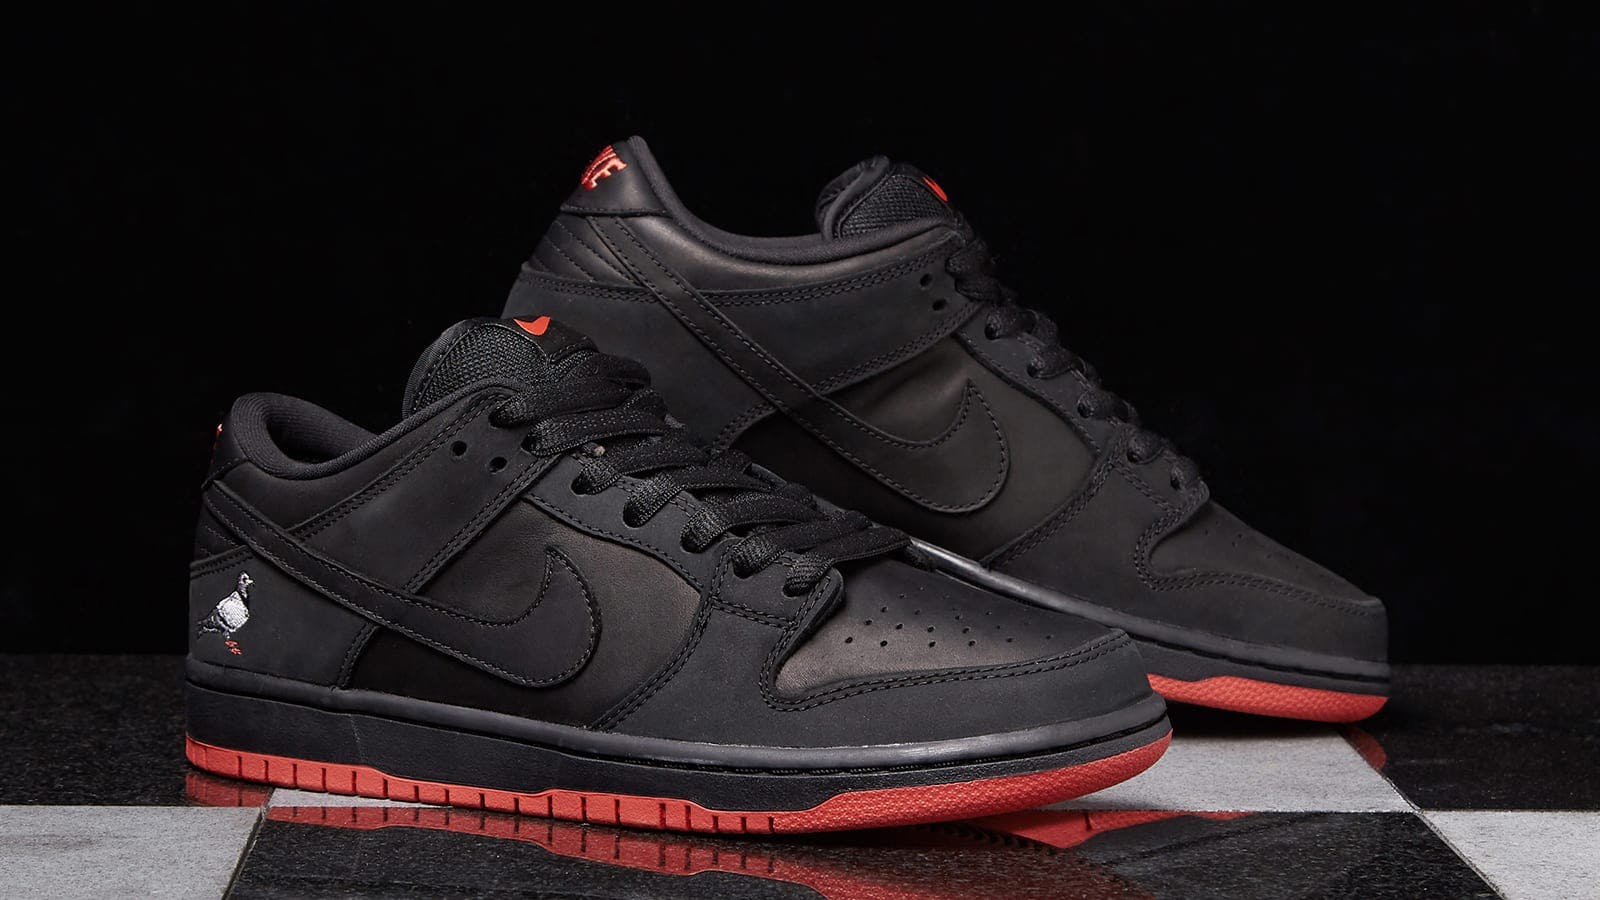 This Nike SB Dunk Is Inspired by a Skateboarding Staple